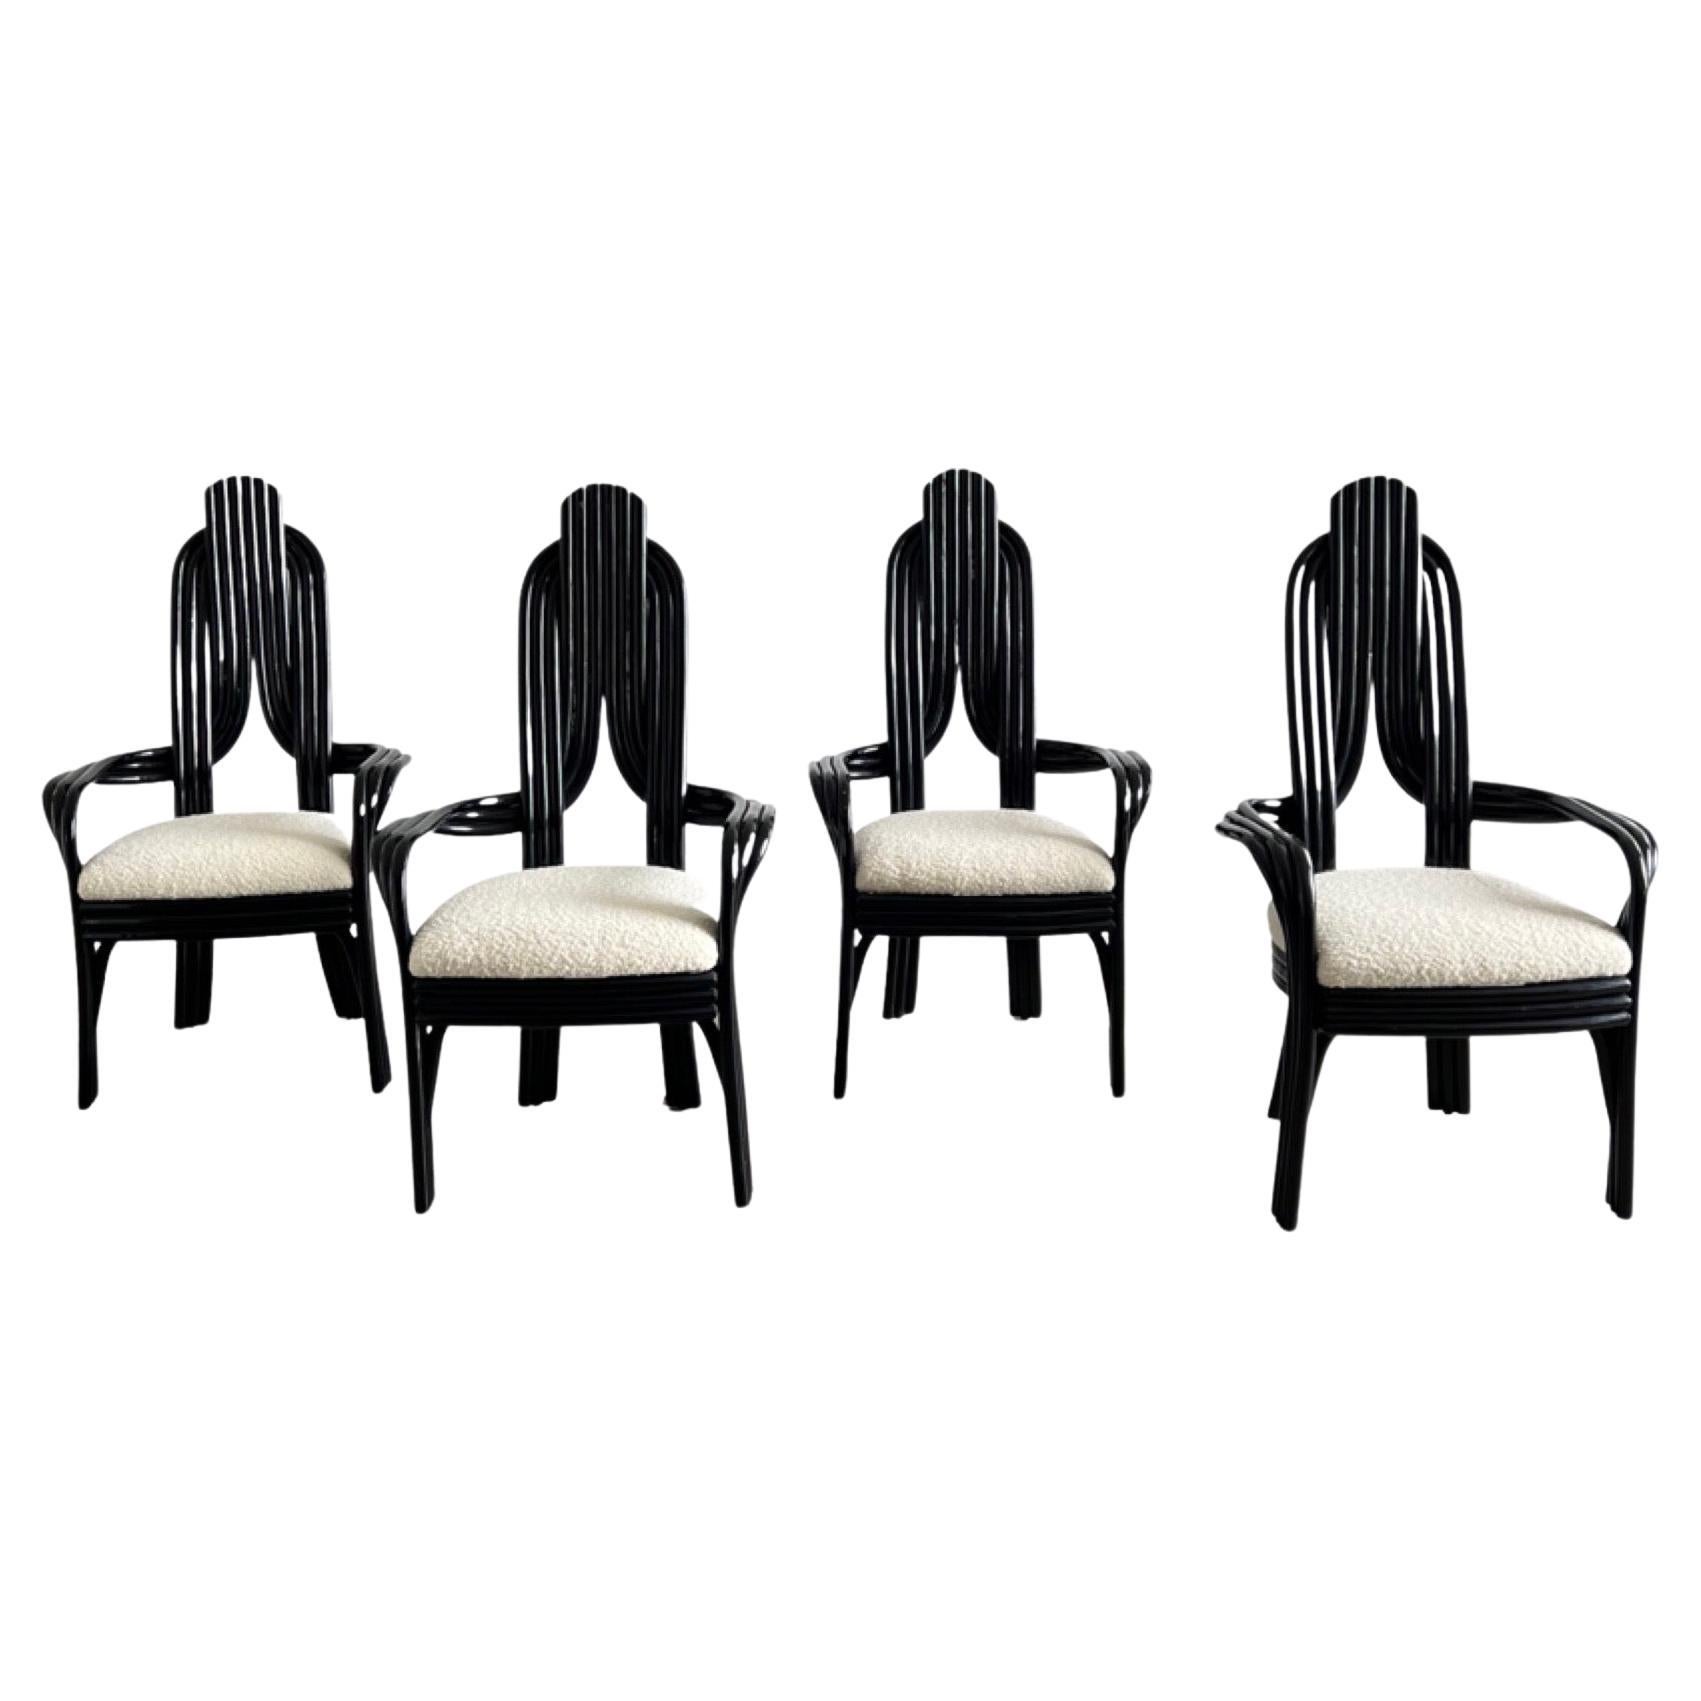 Set off Four Bamboo Dining Chairs by Axel Einthoven for Rohe Noorwolde For Sale